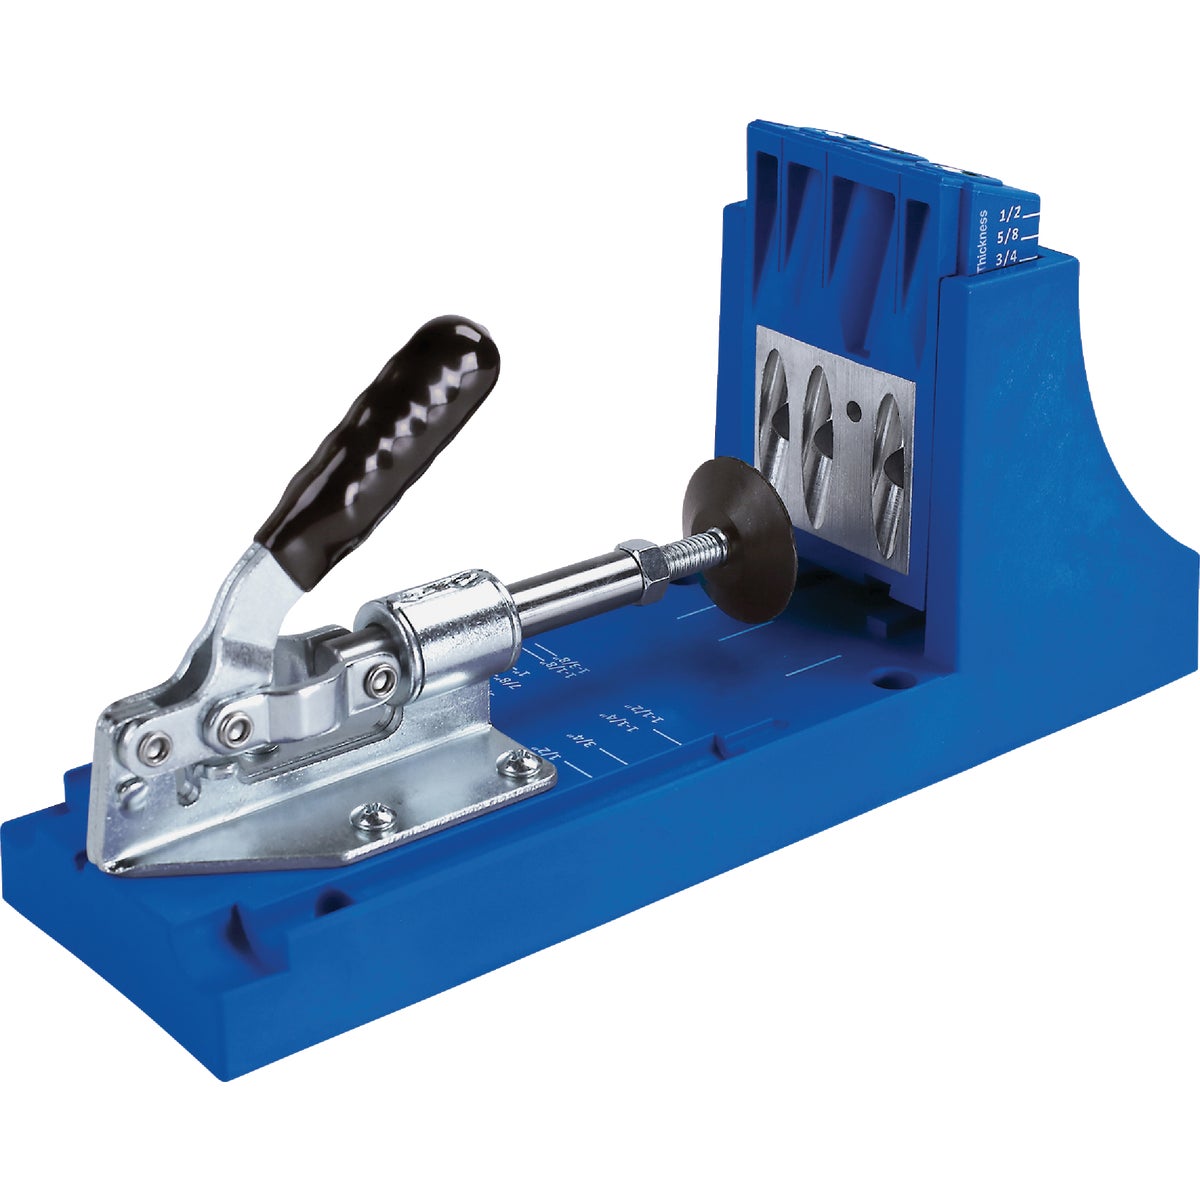 Item 343143, The Kreg Pocket-Hole Jig K4 combines precision and adjustability of a 